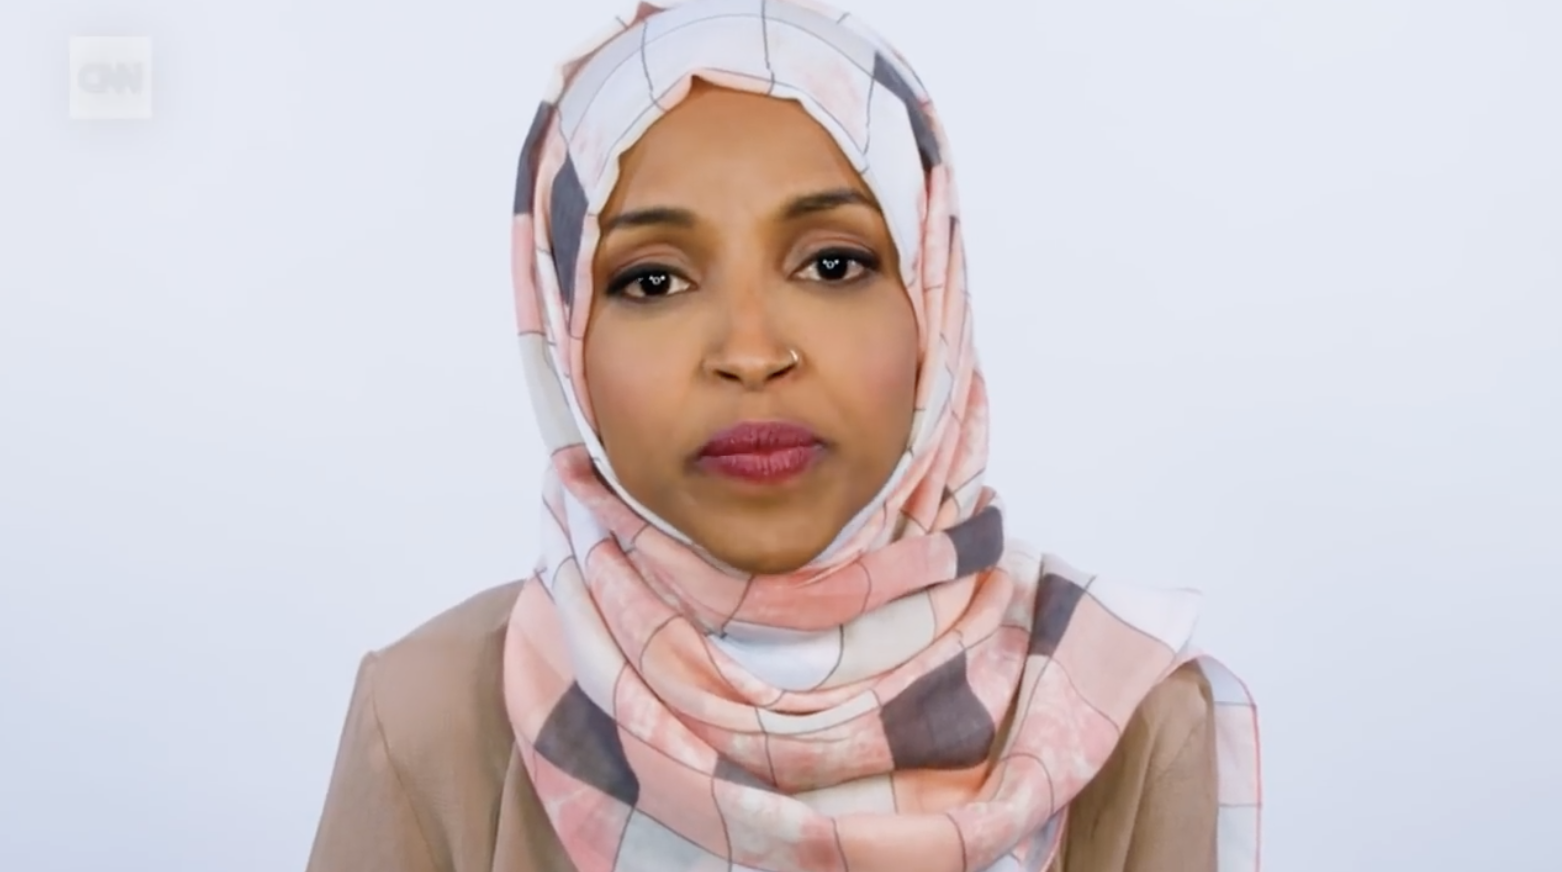 Ilhan Omar (D-Minneapolis) may have improperly used campaign resources for ...